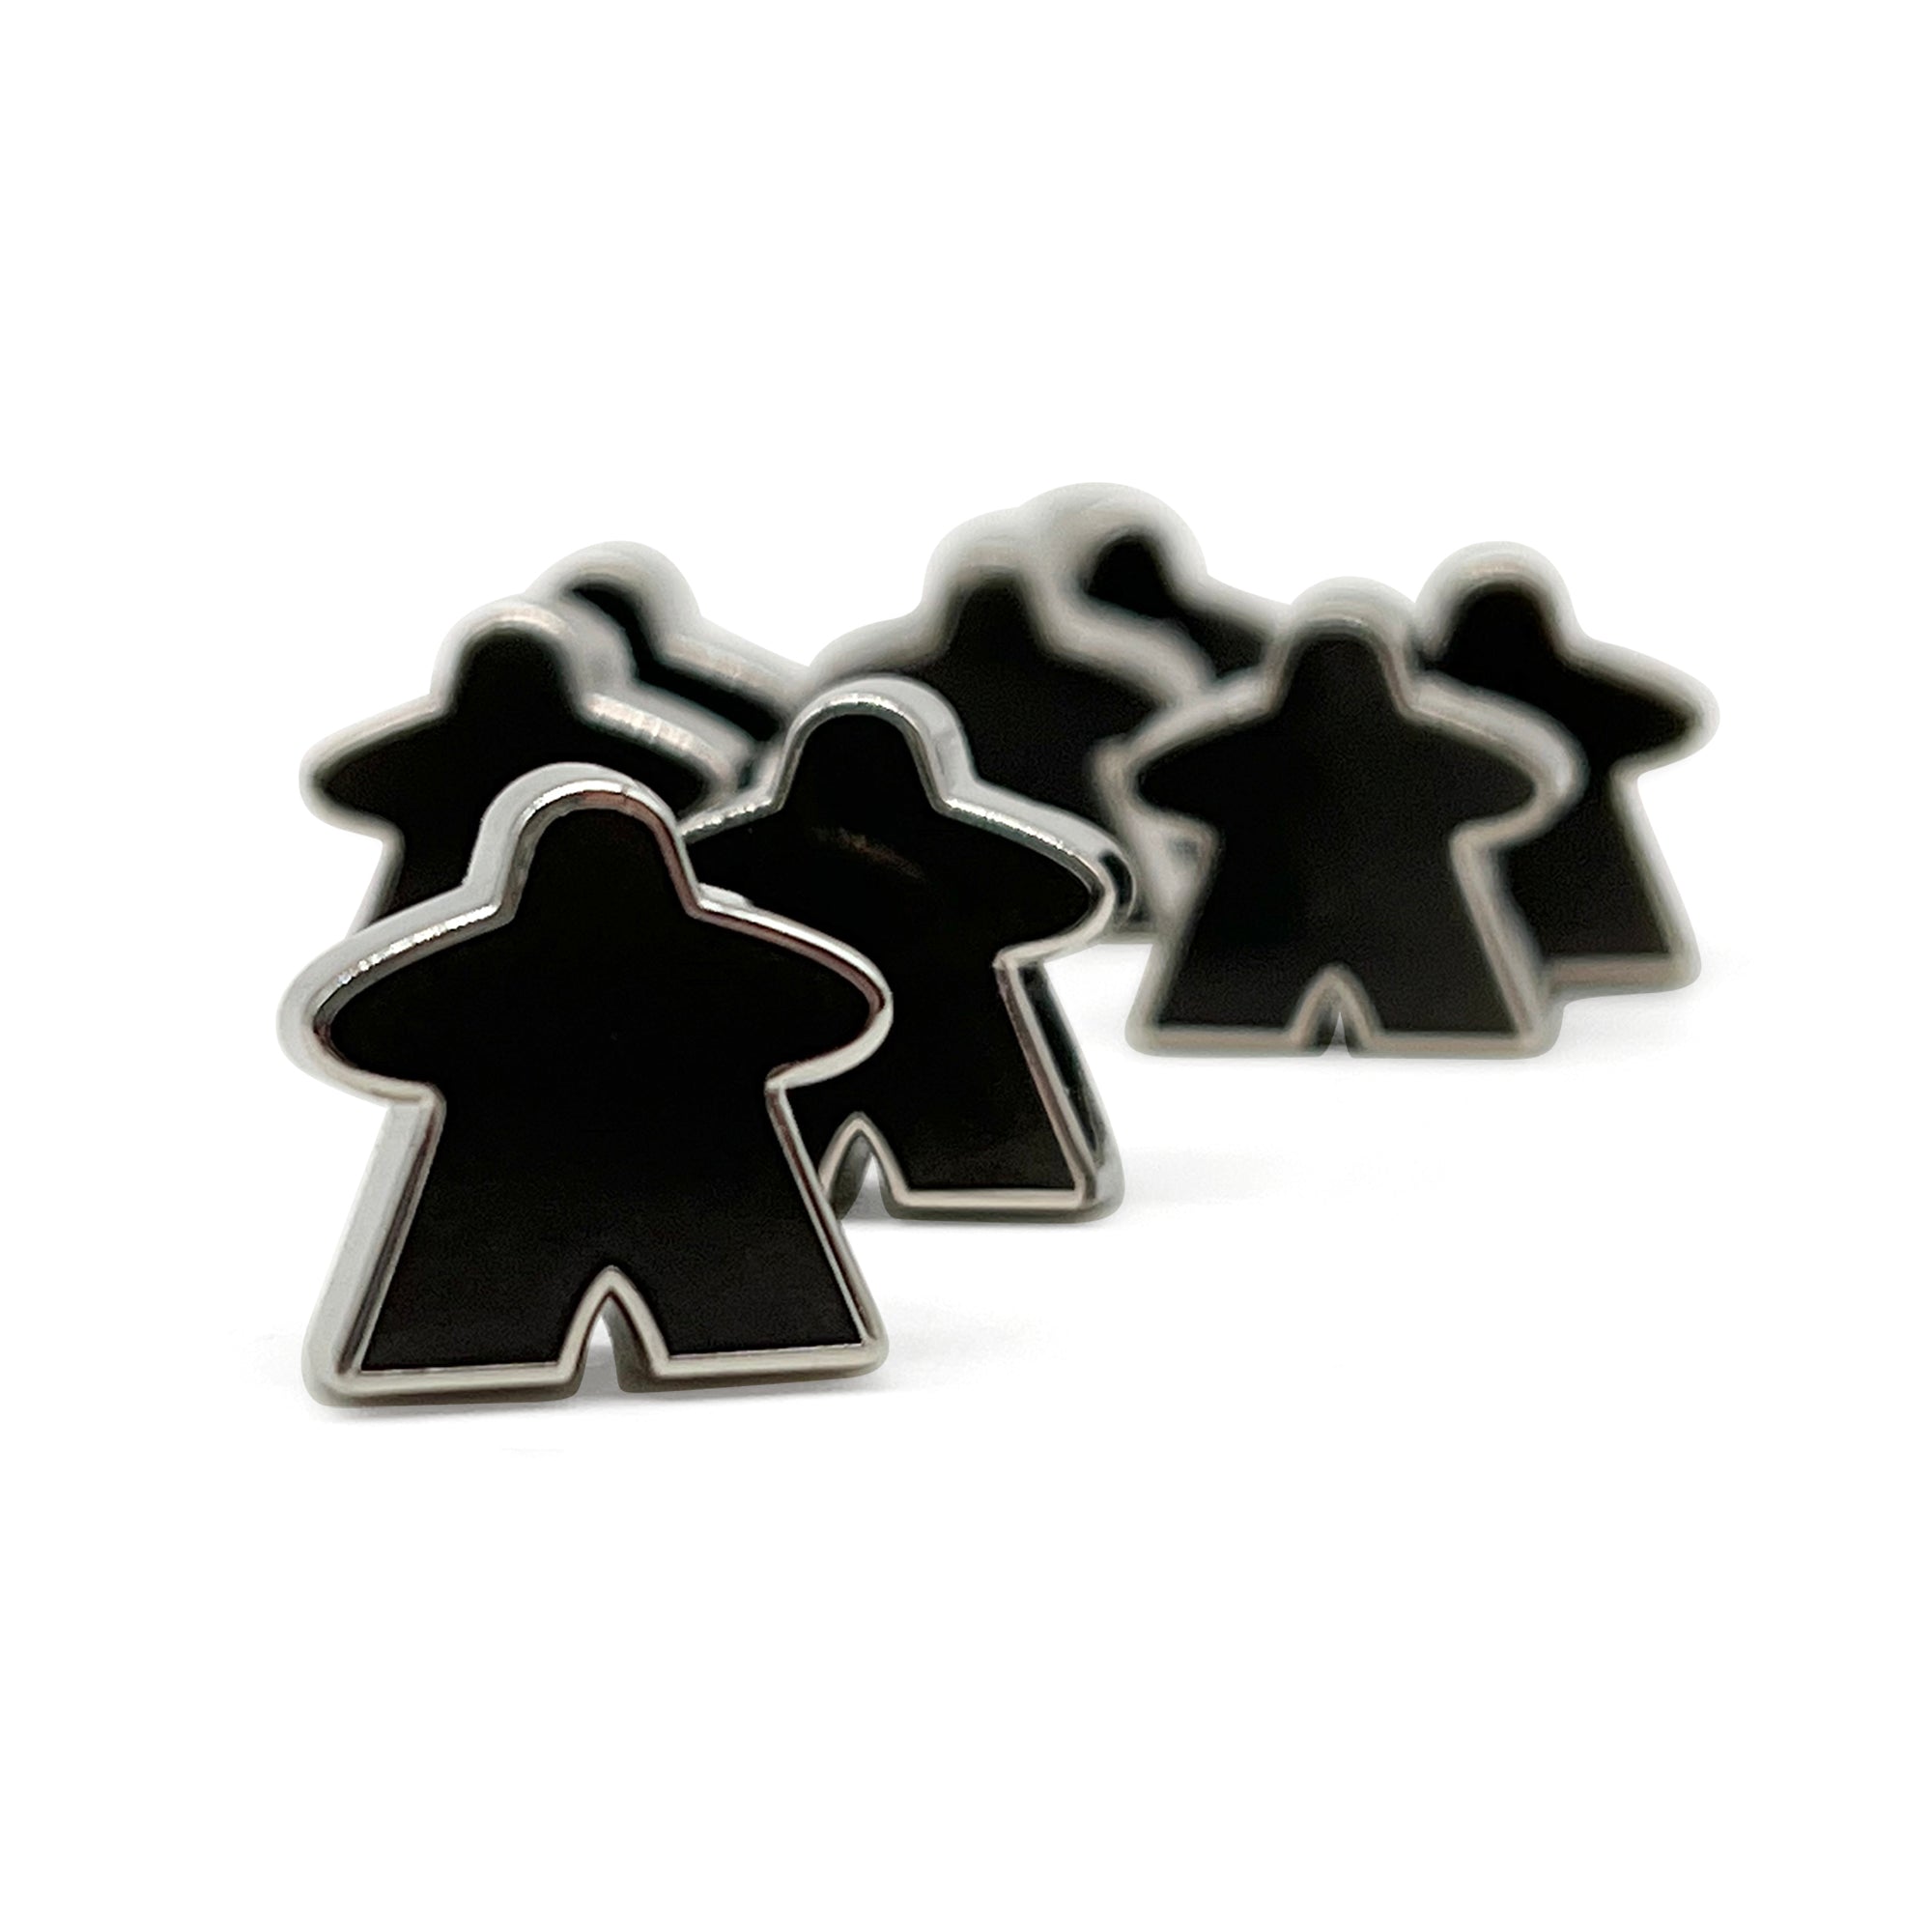 8 Pack of Black Enamel Meeples by Norse Foundry - NOR 03473